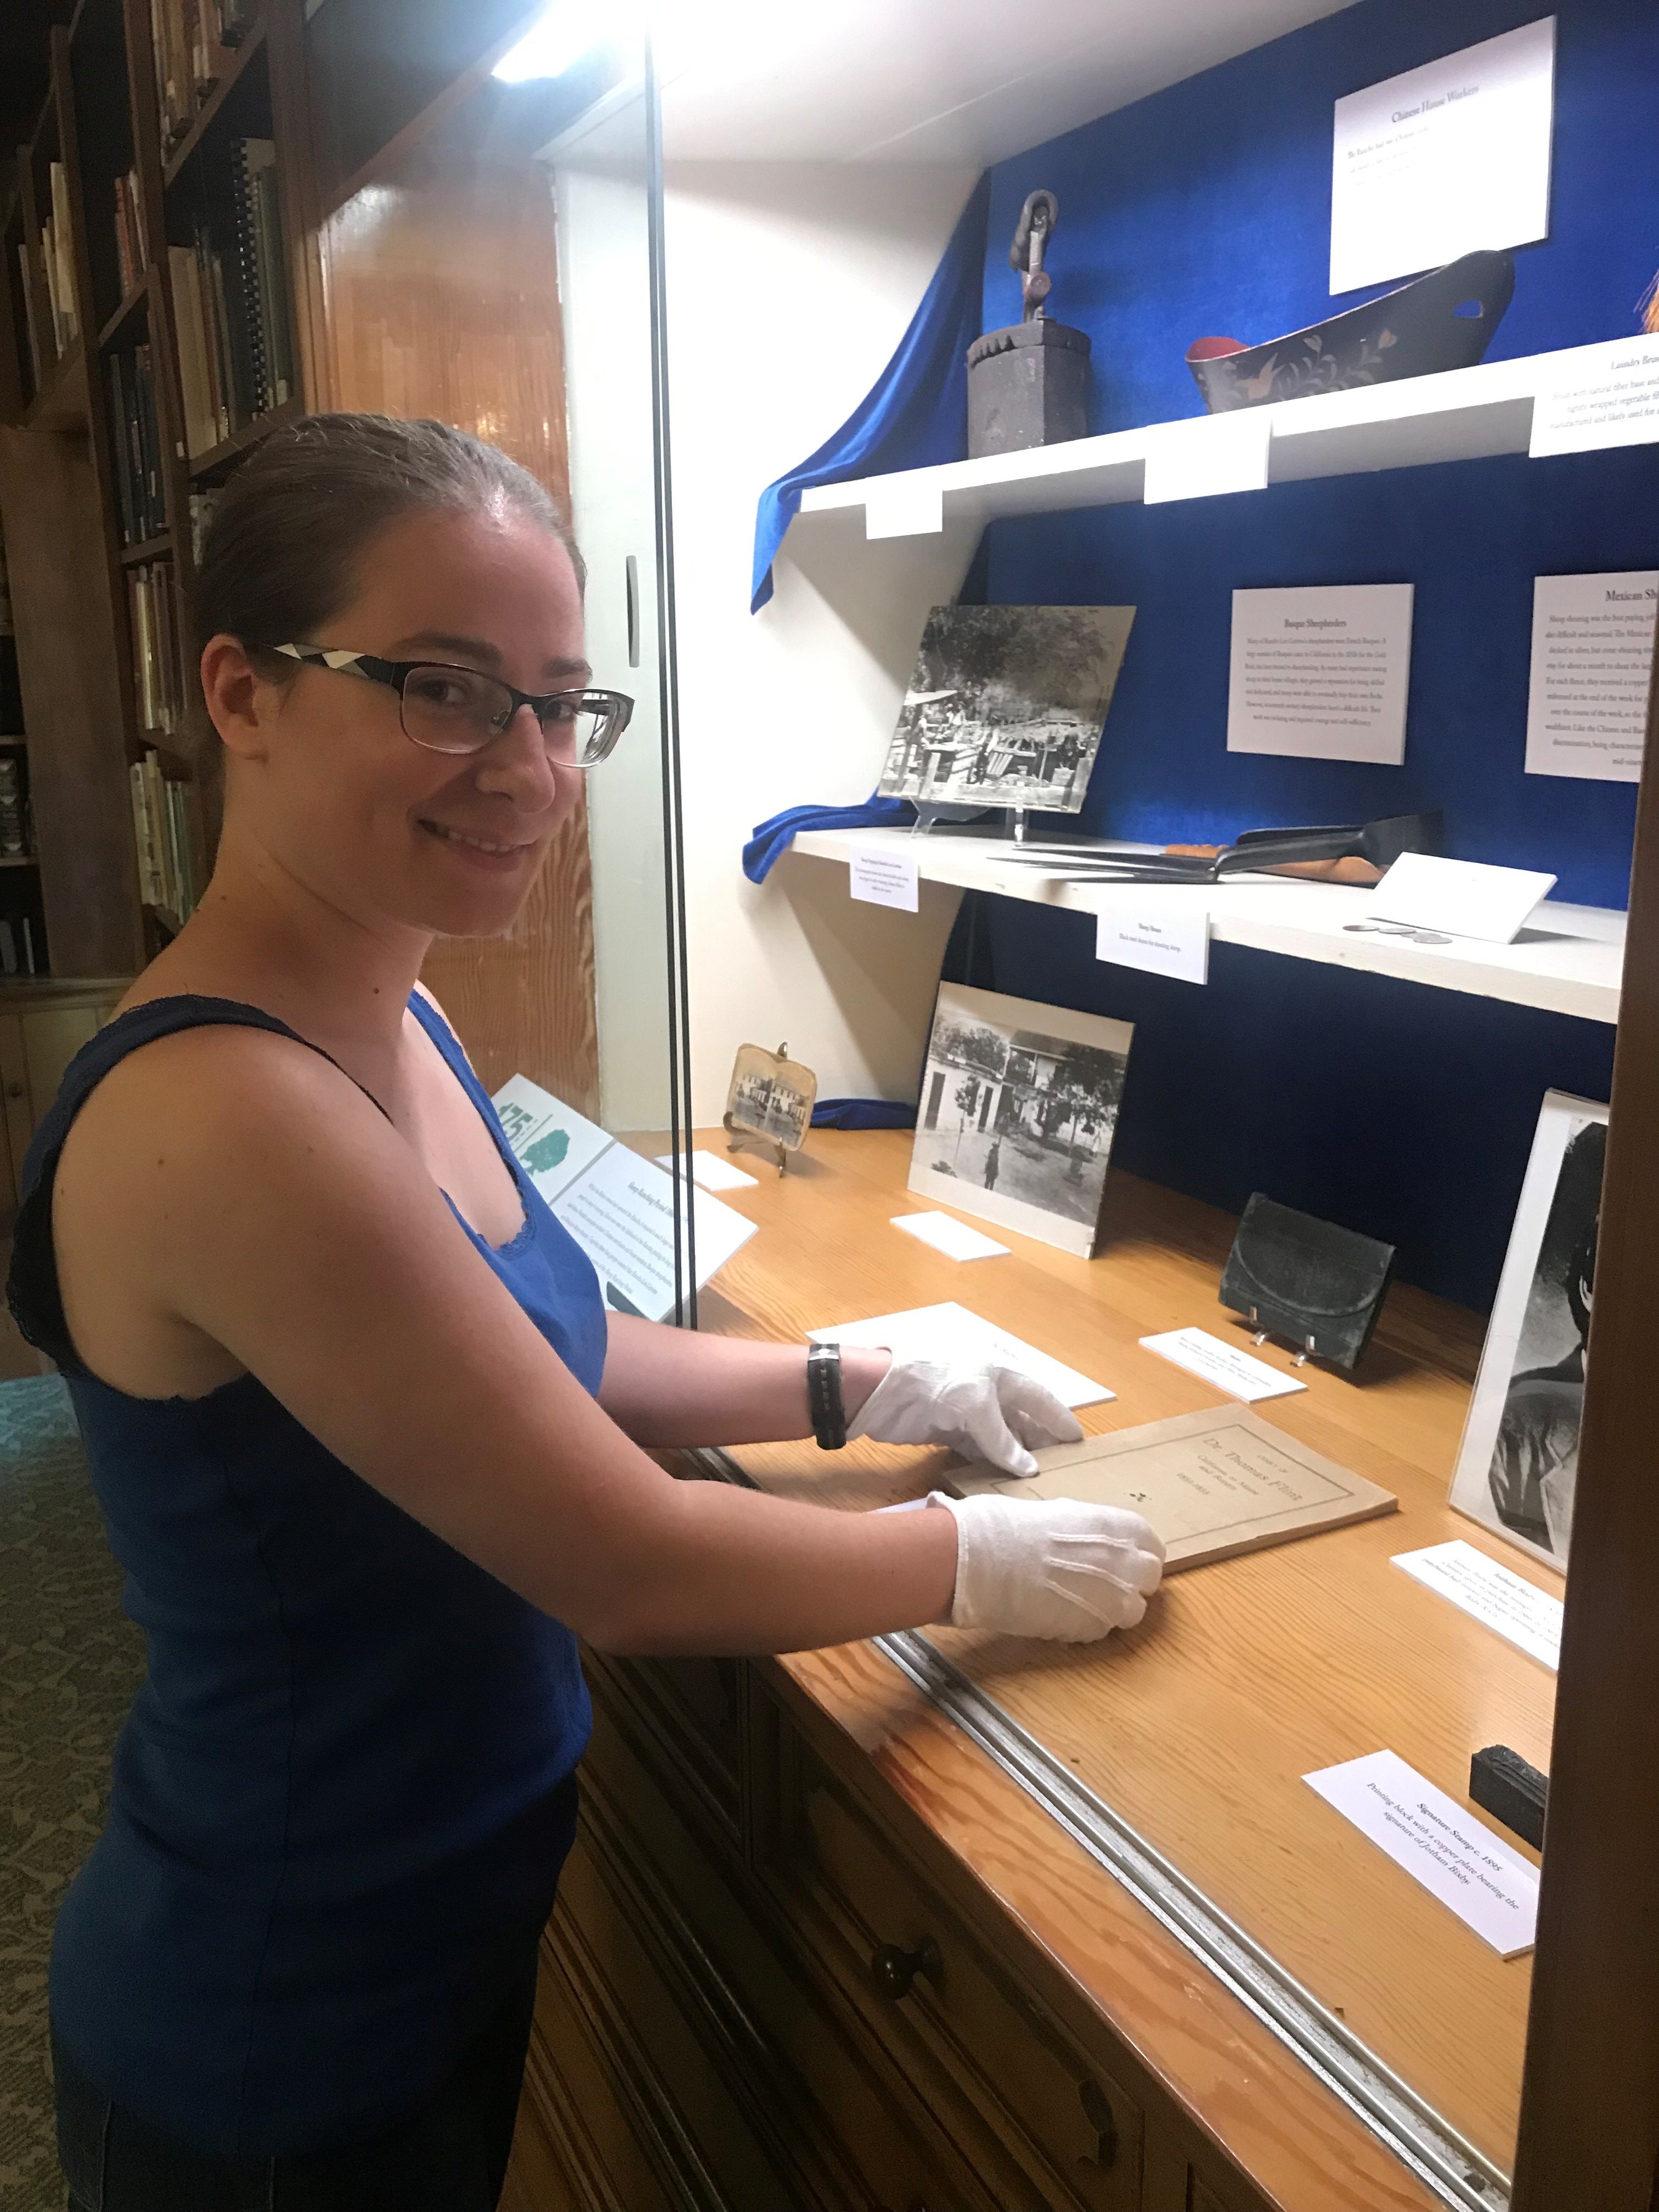 Rancho Los Cerritos' volunteer curatorial intern Nevada Evers installs the latest special exhibit in the library case in commemoration of the 175th anniversary of the adobe's construction (built in 1844) and specifically the sheep ranching years (1866-1890).